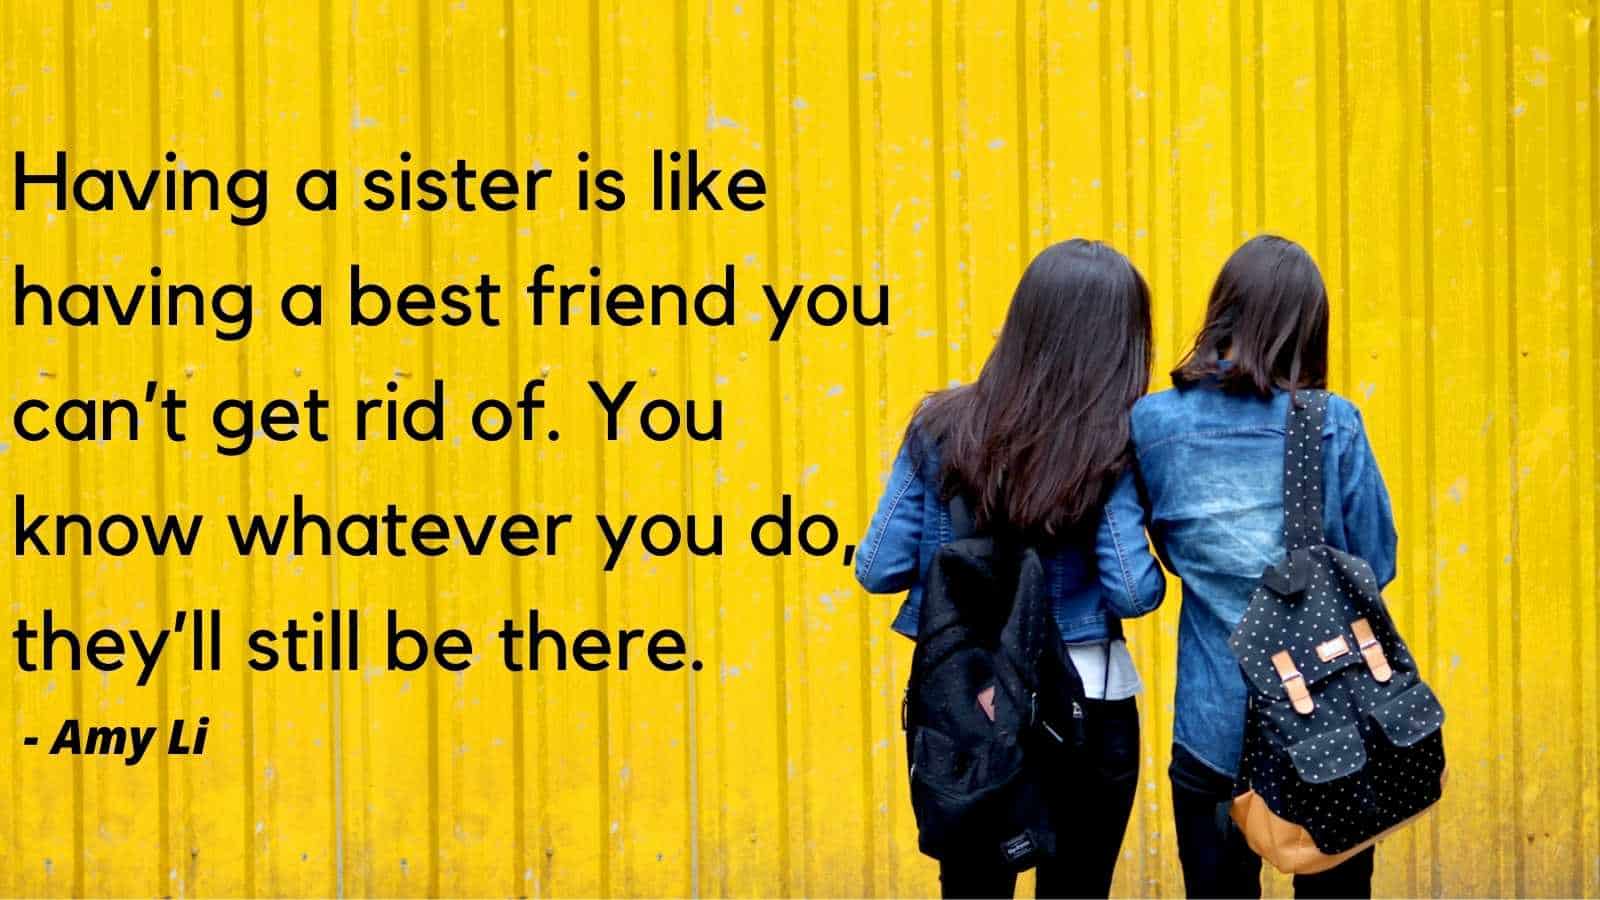 Share These 15 Heartwarming Quotes on Sisters 5 Min. Read